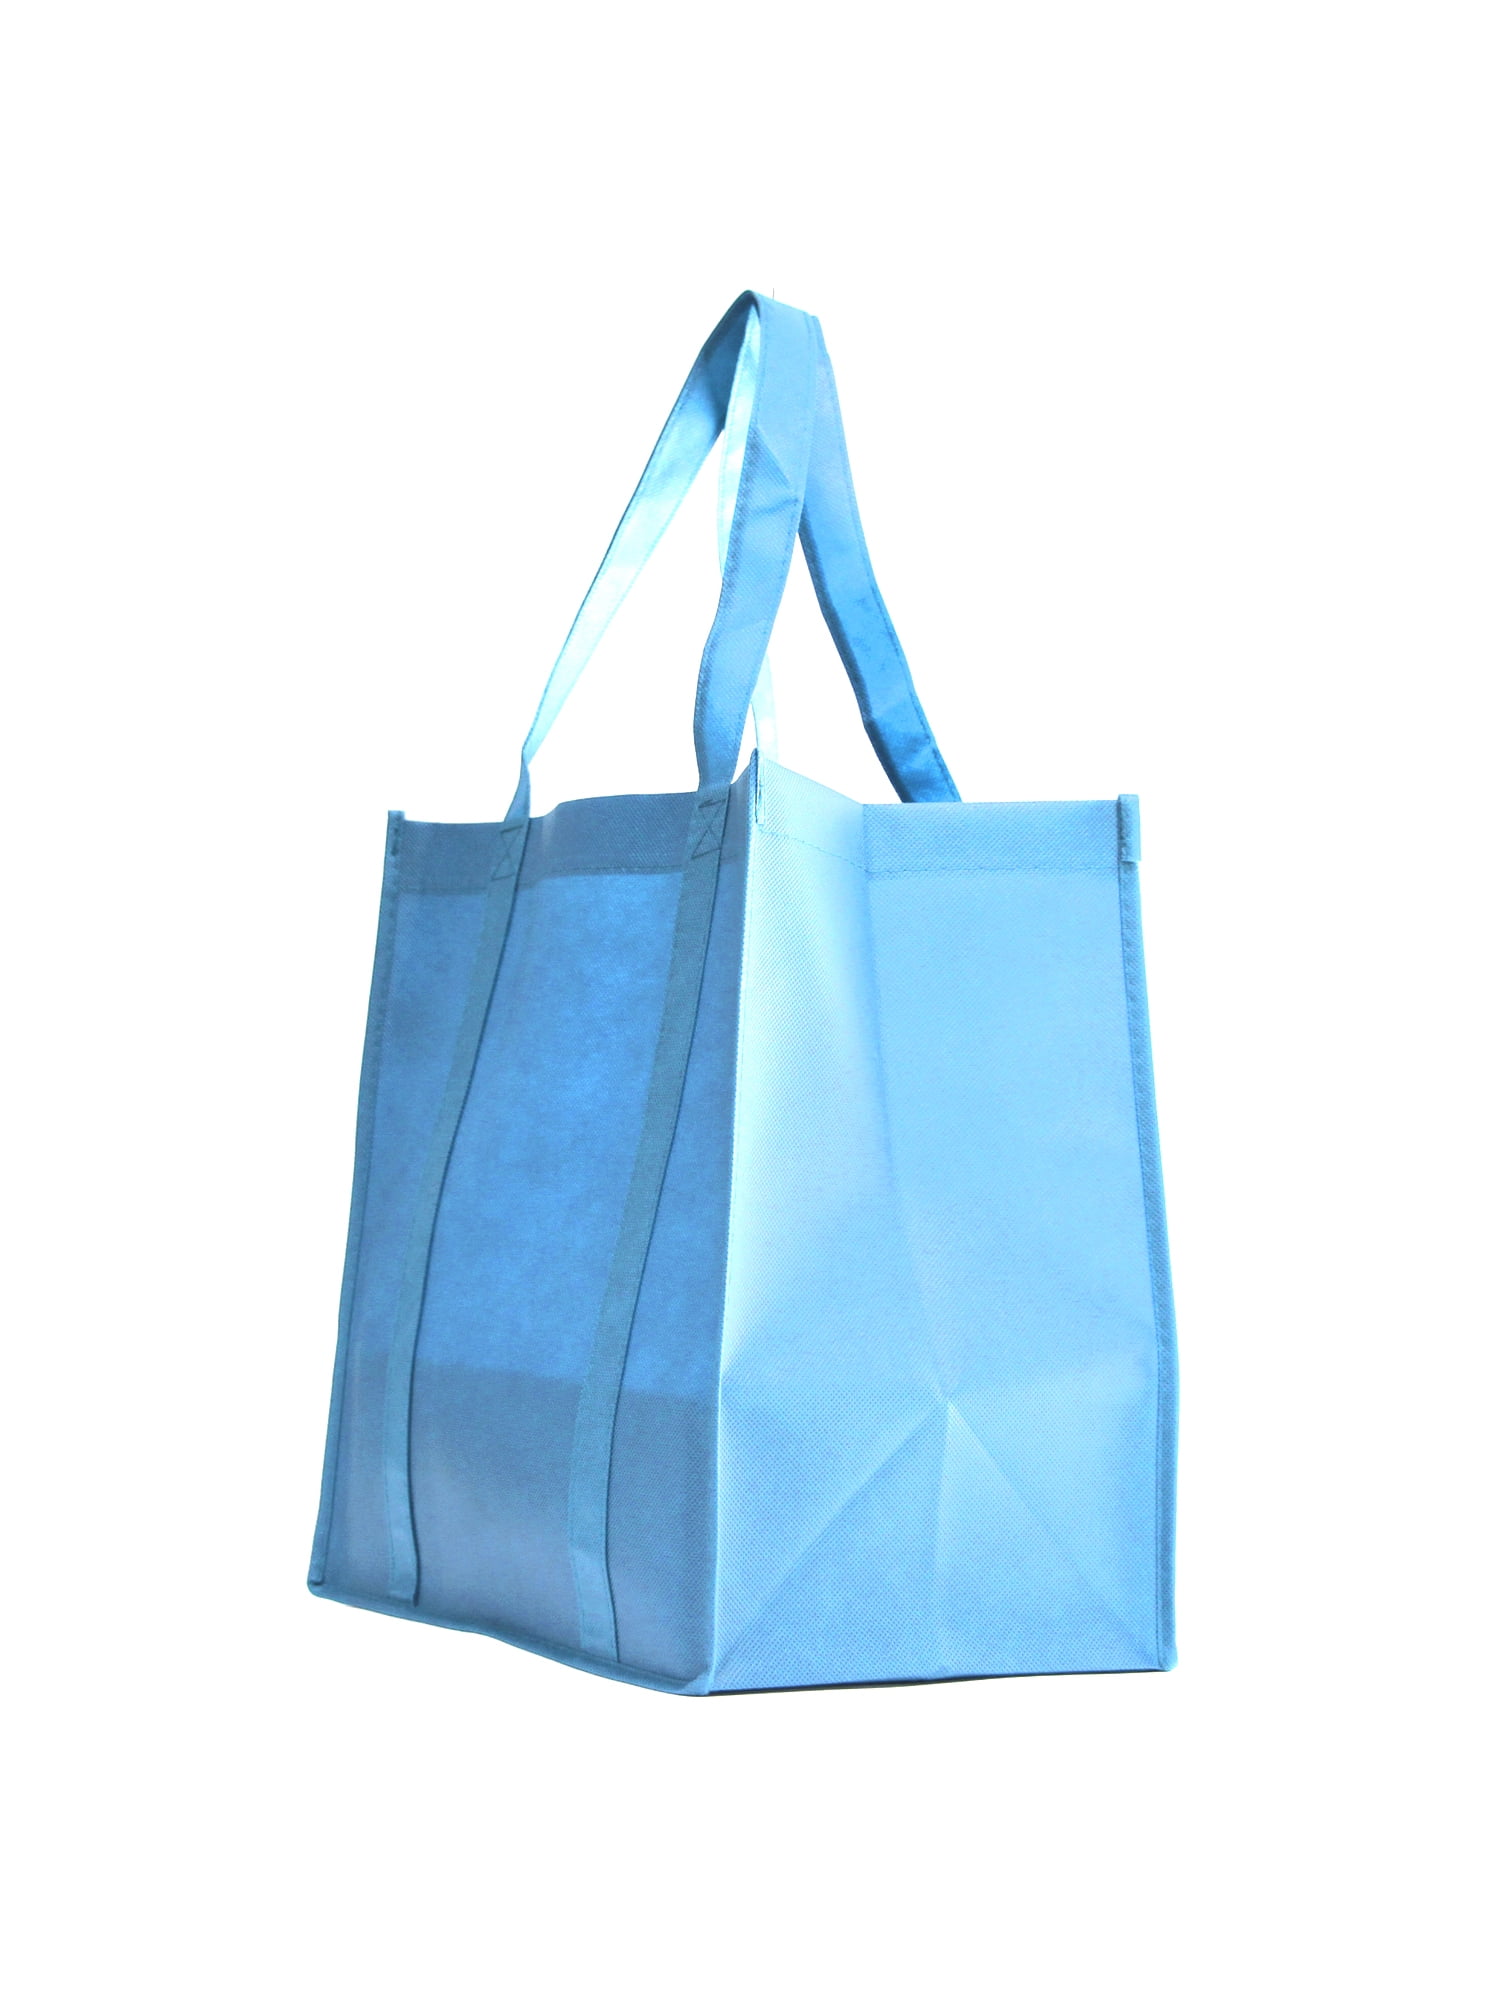 88% OFF on Rawpockets ' Sky Blue Color Tote Bag ' - reusable 100